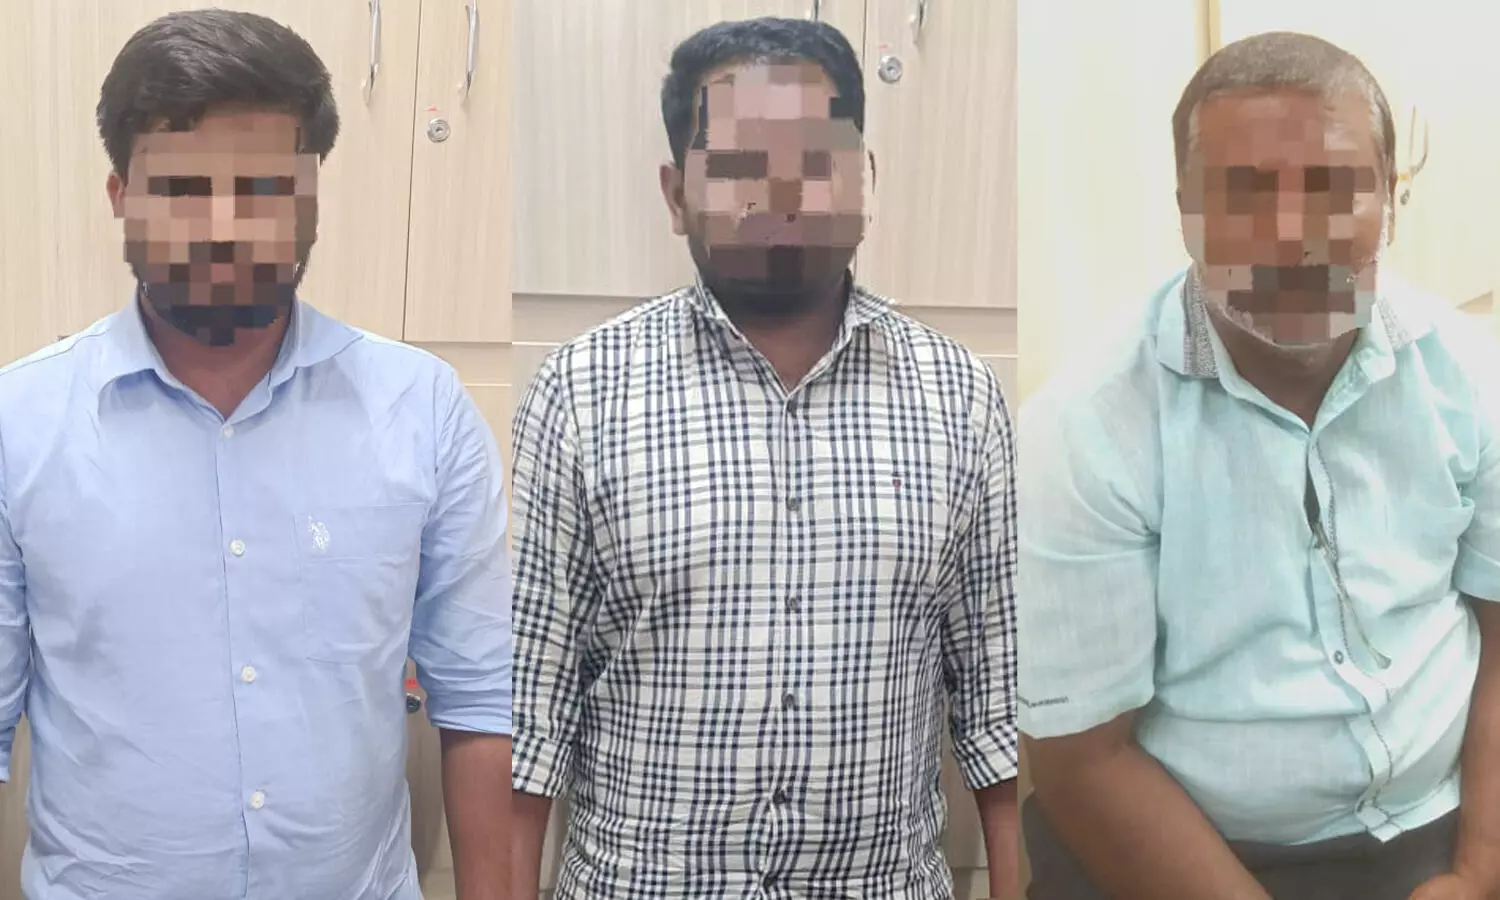 Crypto currency Scam: Cyberabad police nab 3 for duping people of Rs 10 crore